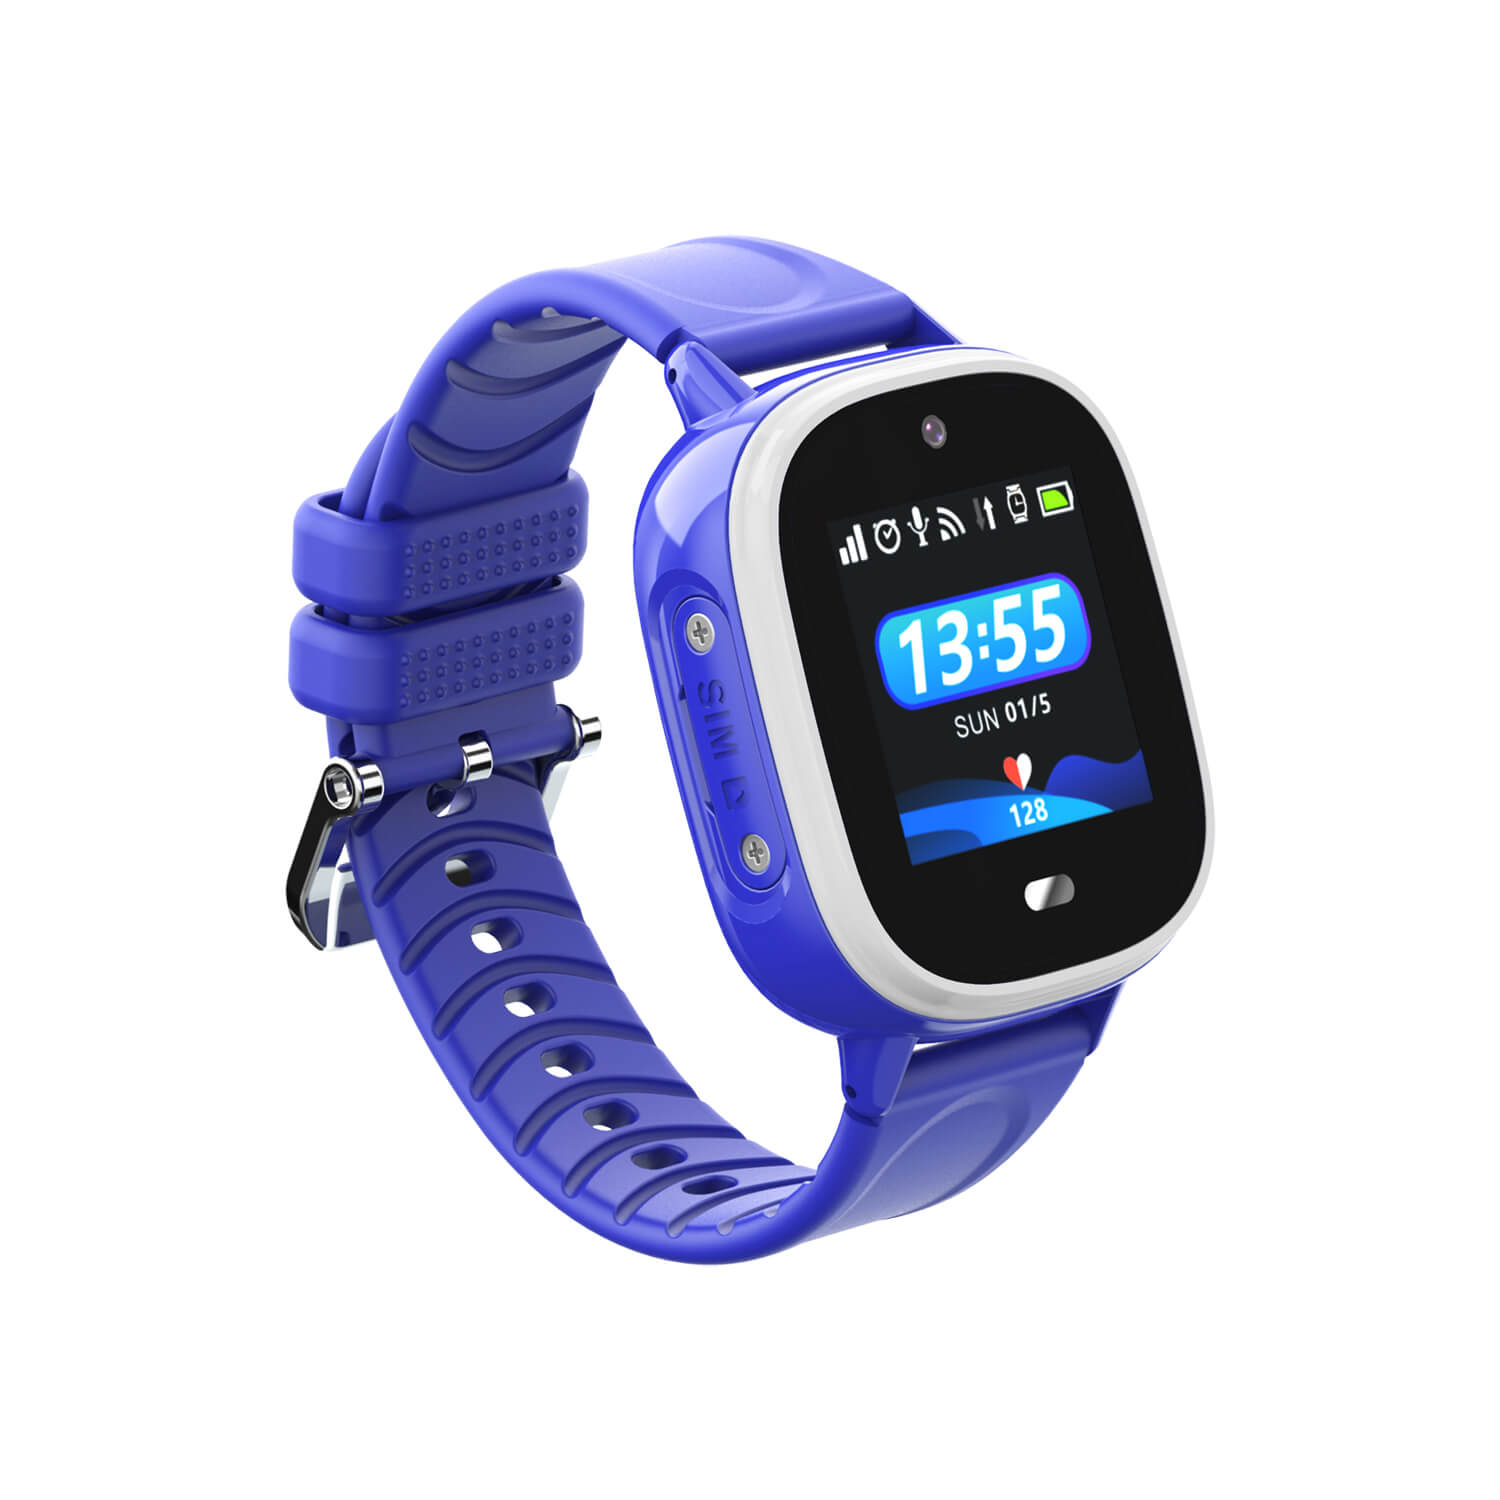 Quality 2G Waterproof Smart Safety Tracker Watch GPS with Removal Alert